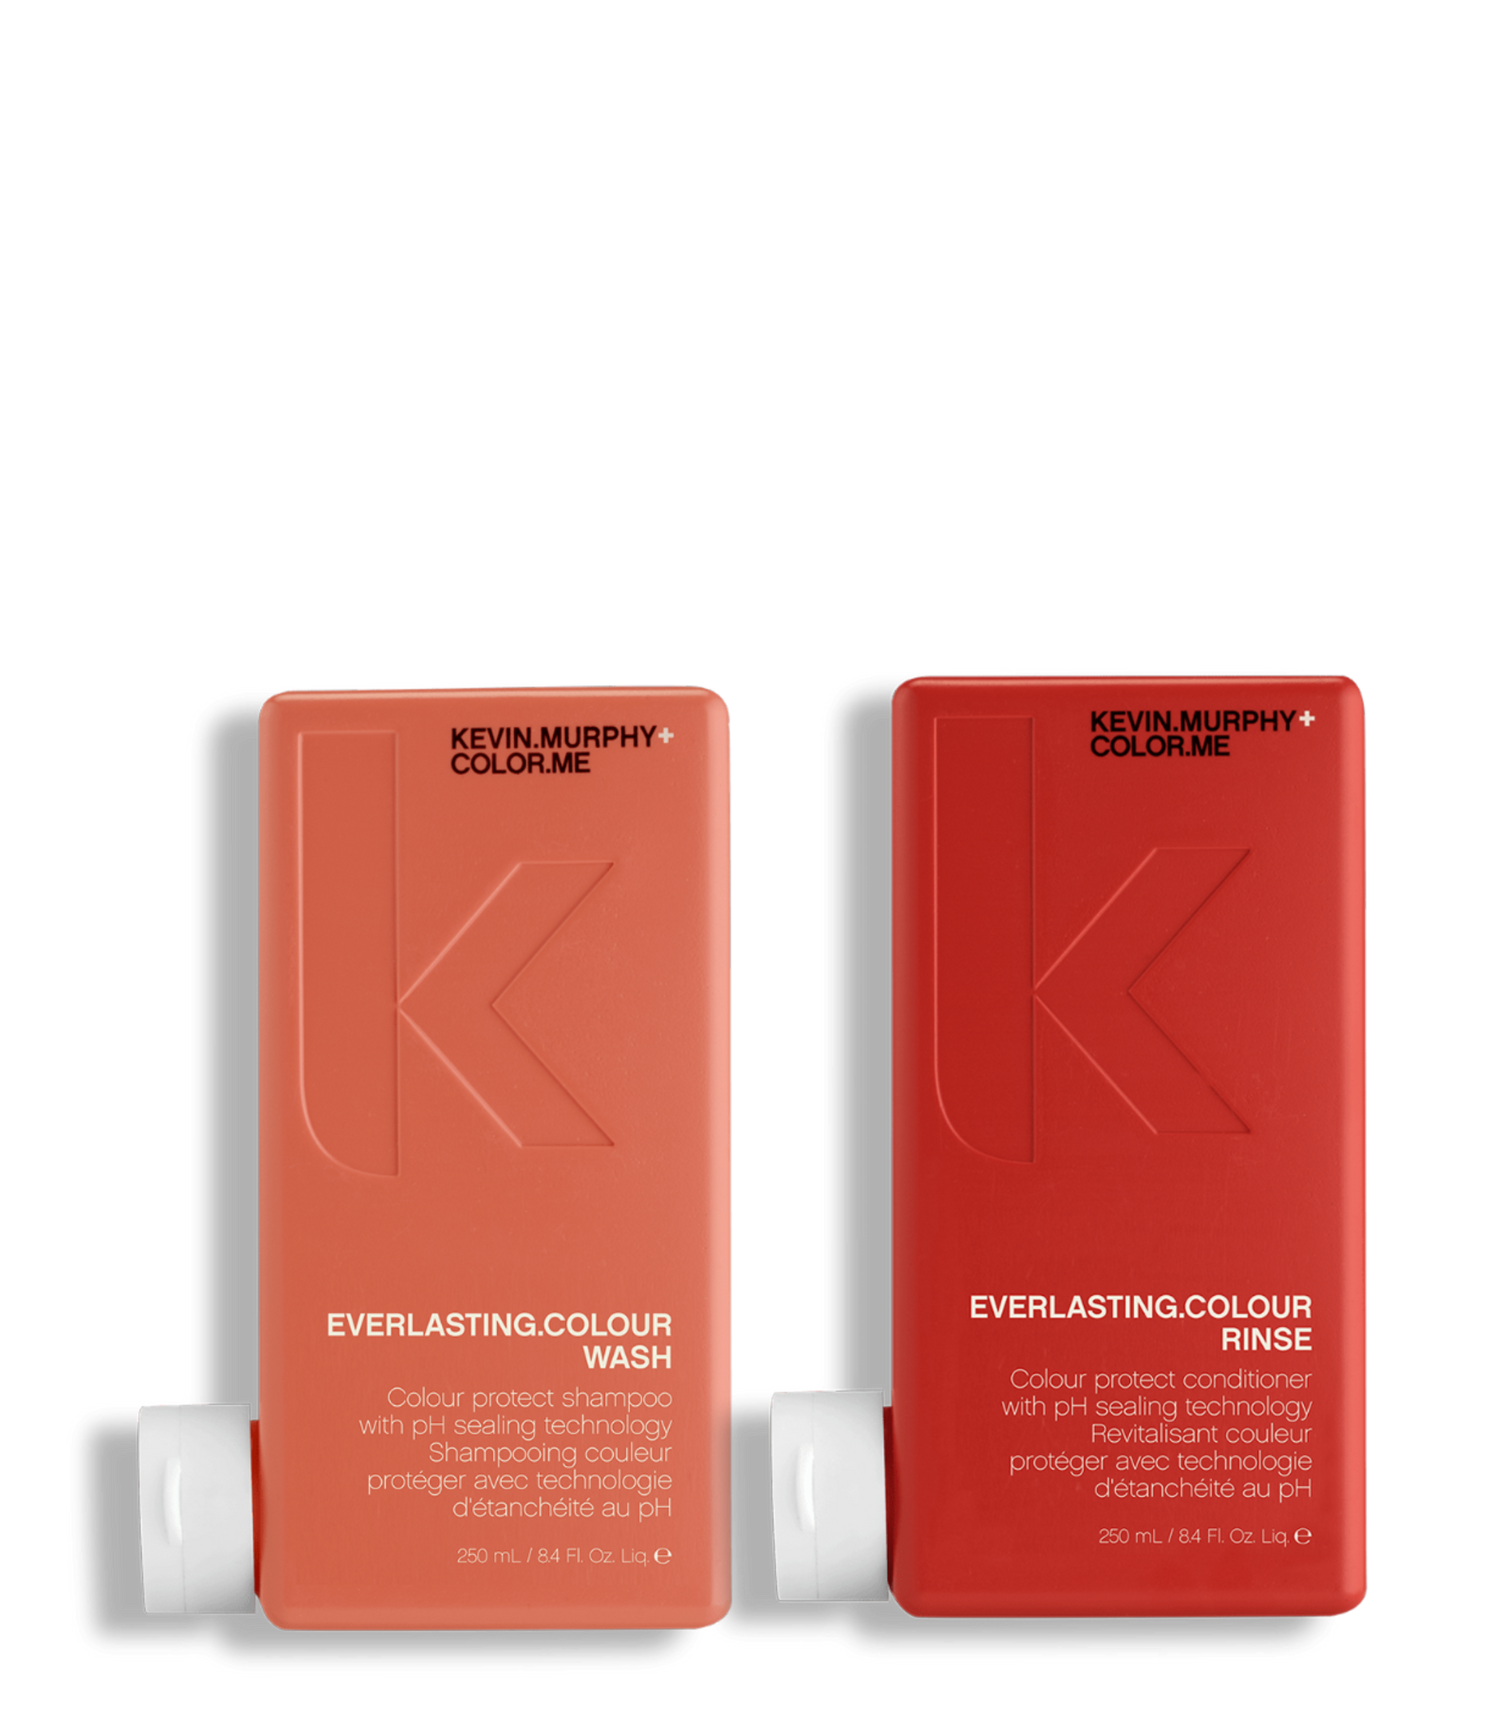 GAMME EVERLASTING COLOUR KEVIN MURPHY